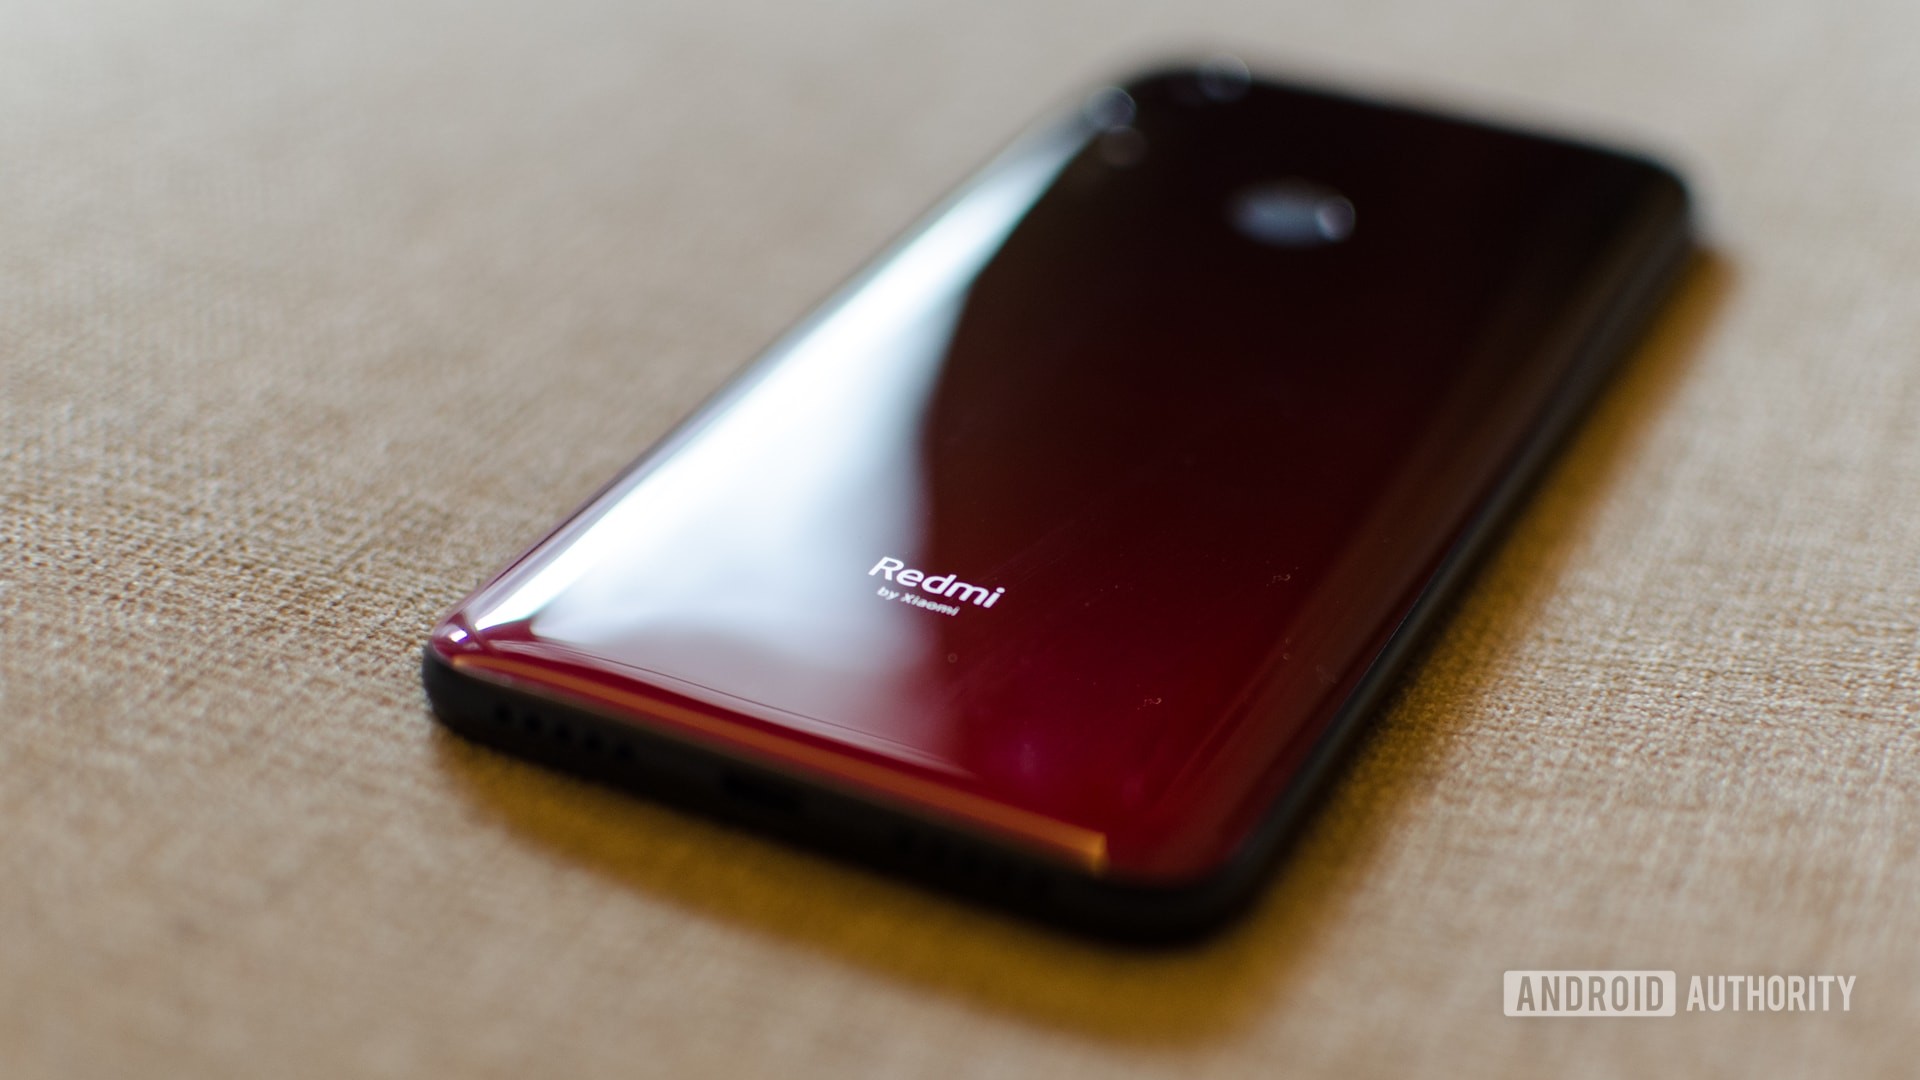 The Redmi Note 8 is expected to be a huge upgrade over devices like the Redmi 7 and Note 7.